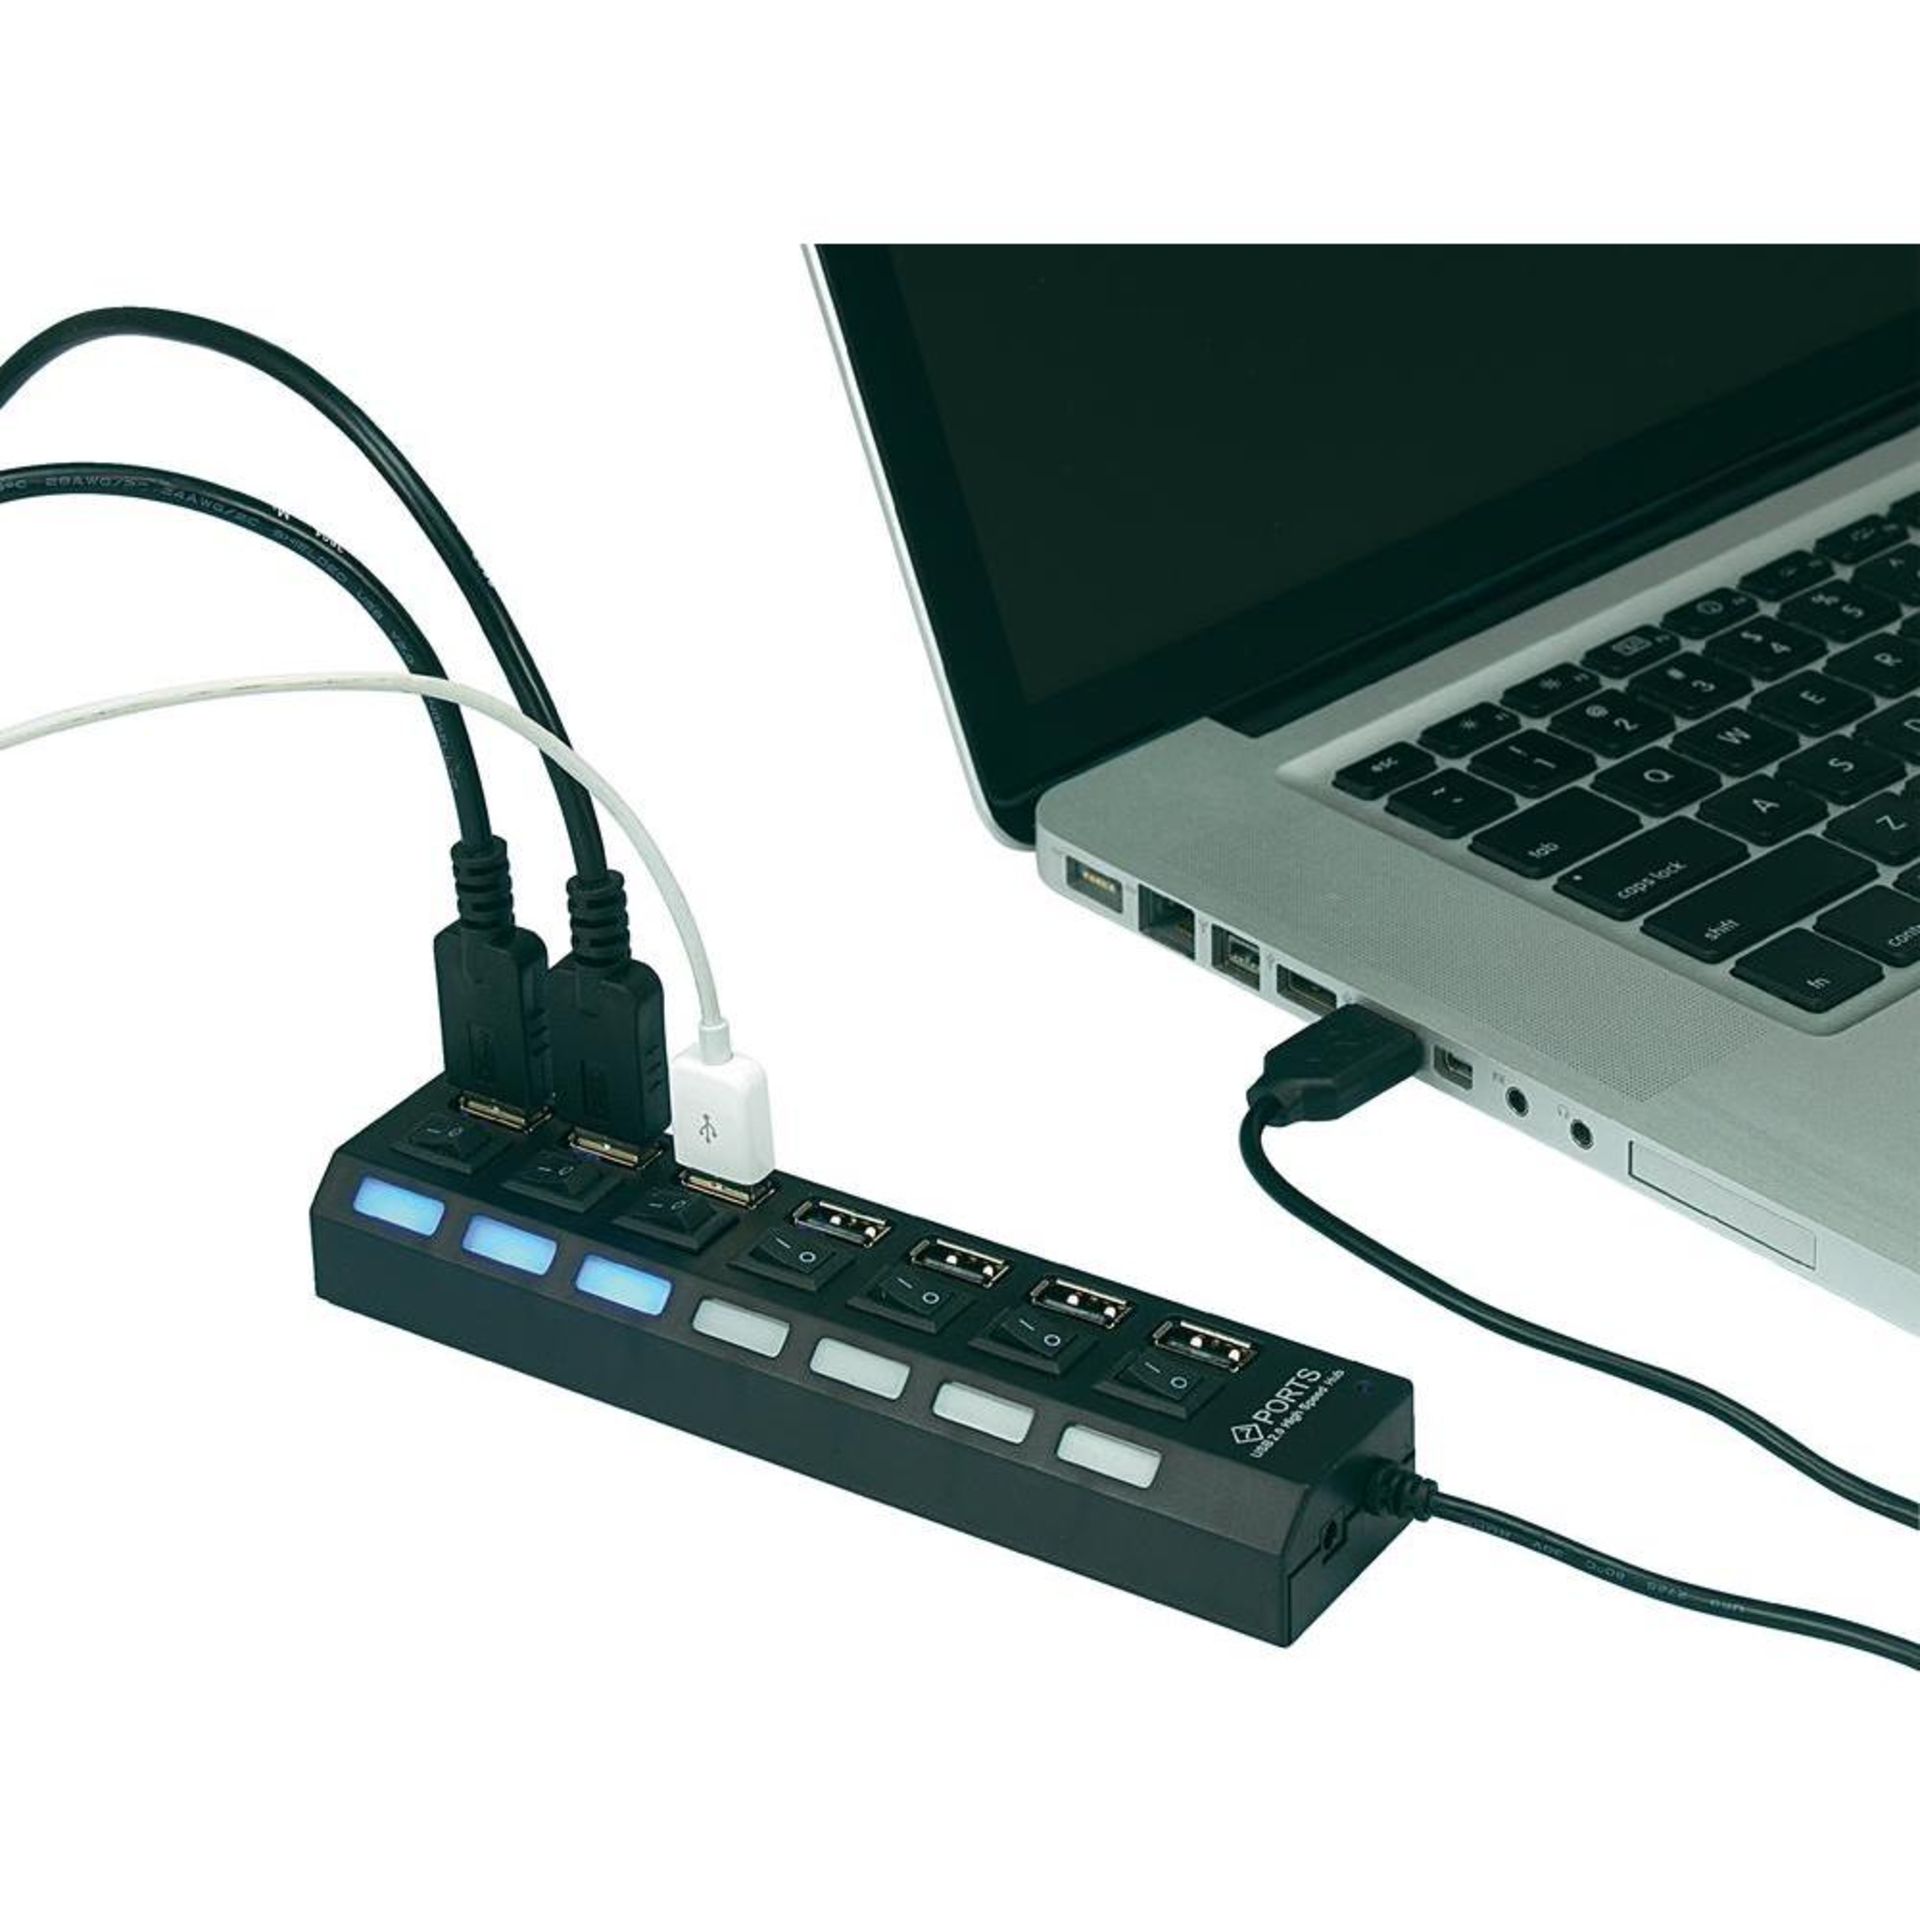 *TRADE QTY* Brand New 7 Port USB High Speed Hub - On/Off Switch on Each Port - With Blue LED - Image 2 of 2